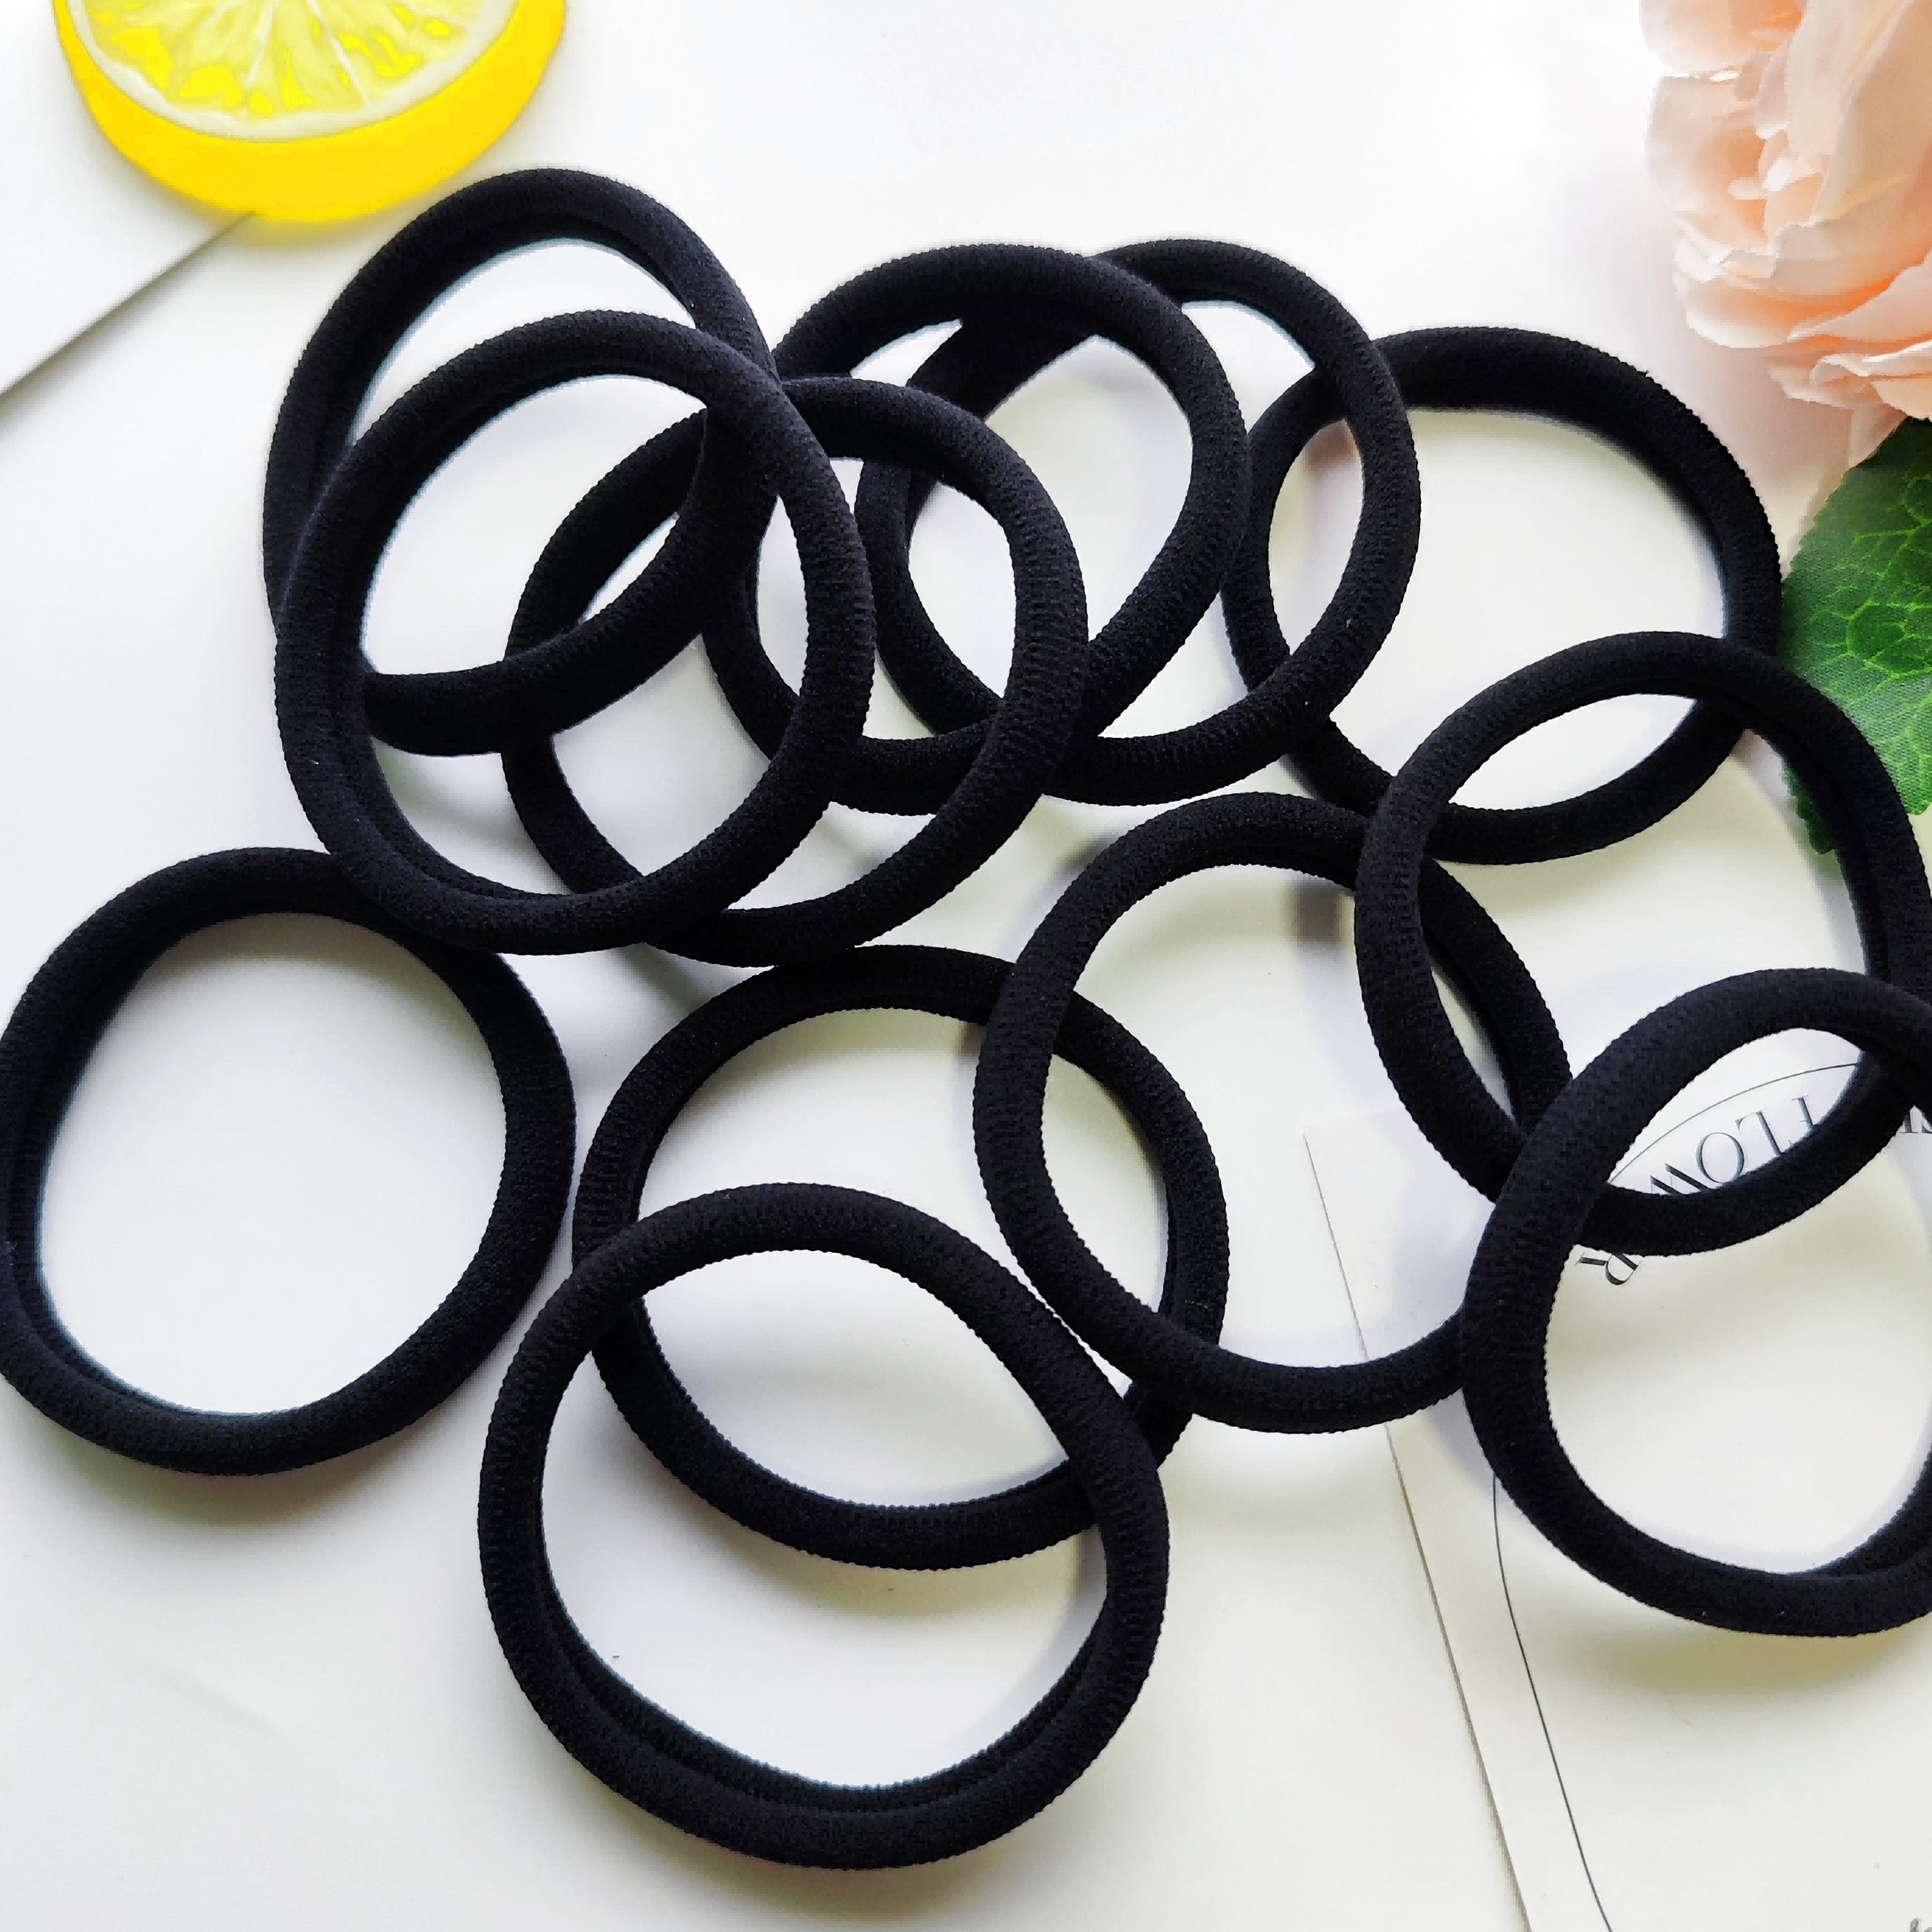 20 PCS Large Hair Ties for Thick Hair Black Hair Bands for Women Men and  Girls No Damage Stretchy Ponytail Holders for Braids (5 cm in Diameter, 1  cm